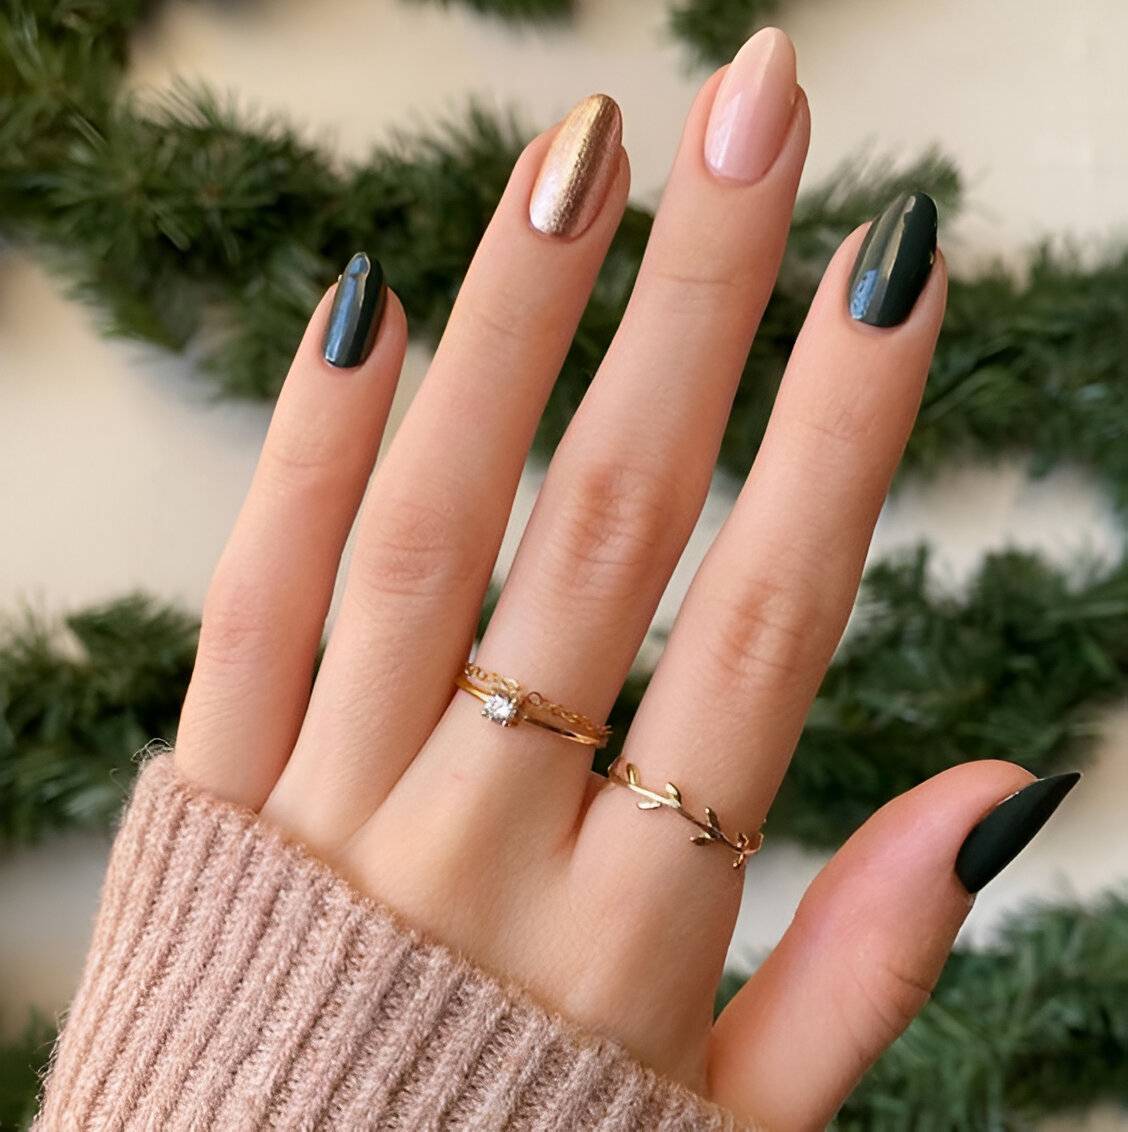 30 Drool-Worthy Short Almond Nail Ideas Every Chic Lady Needs - 237